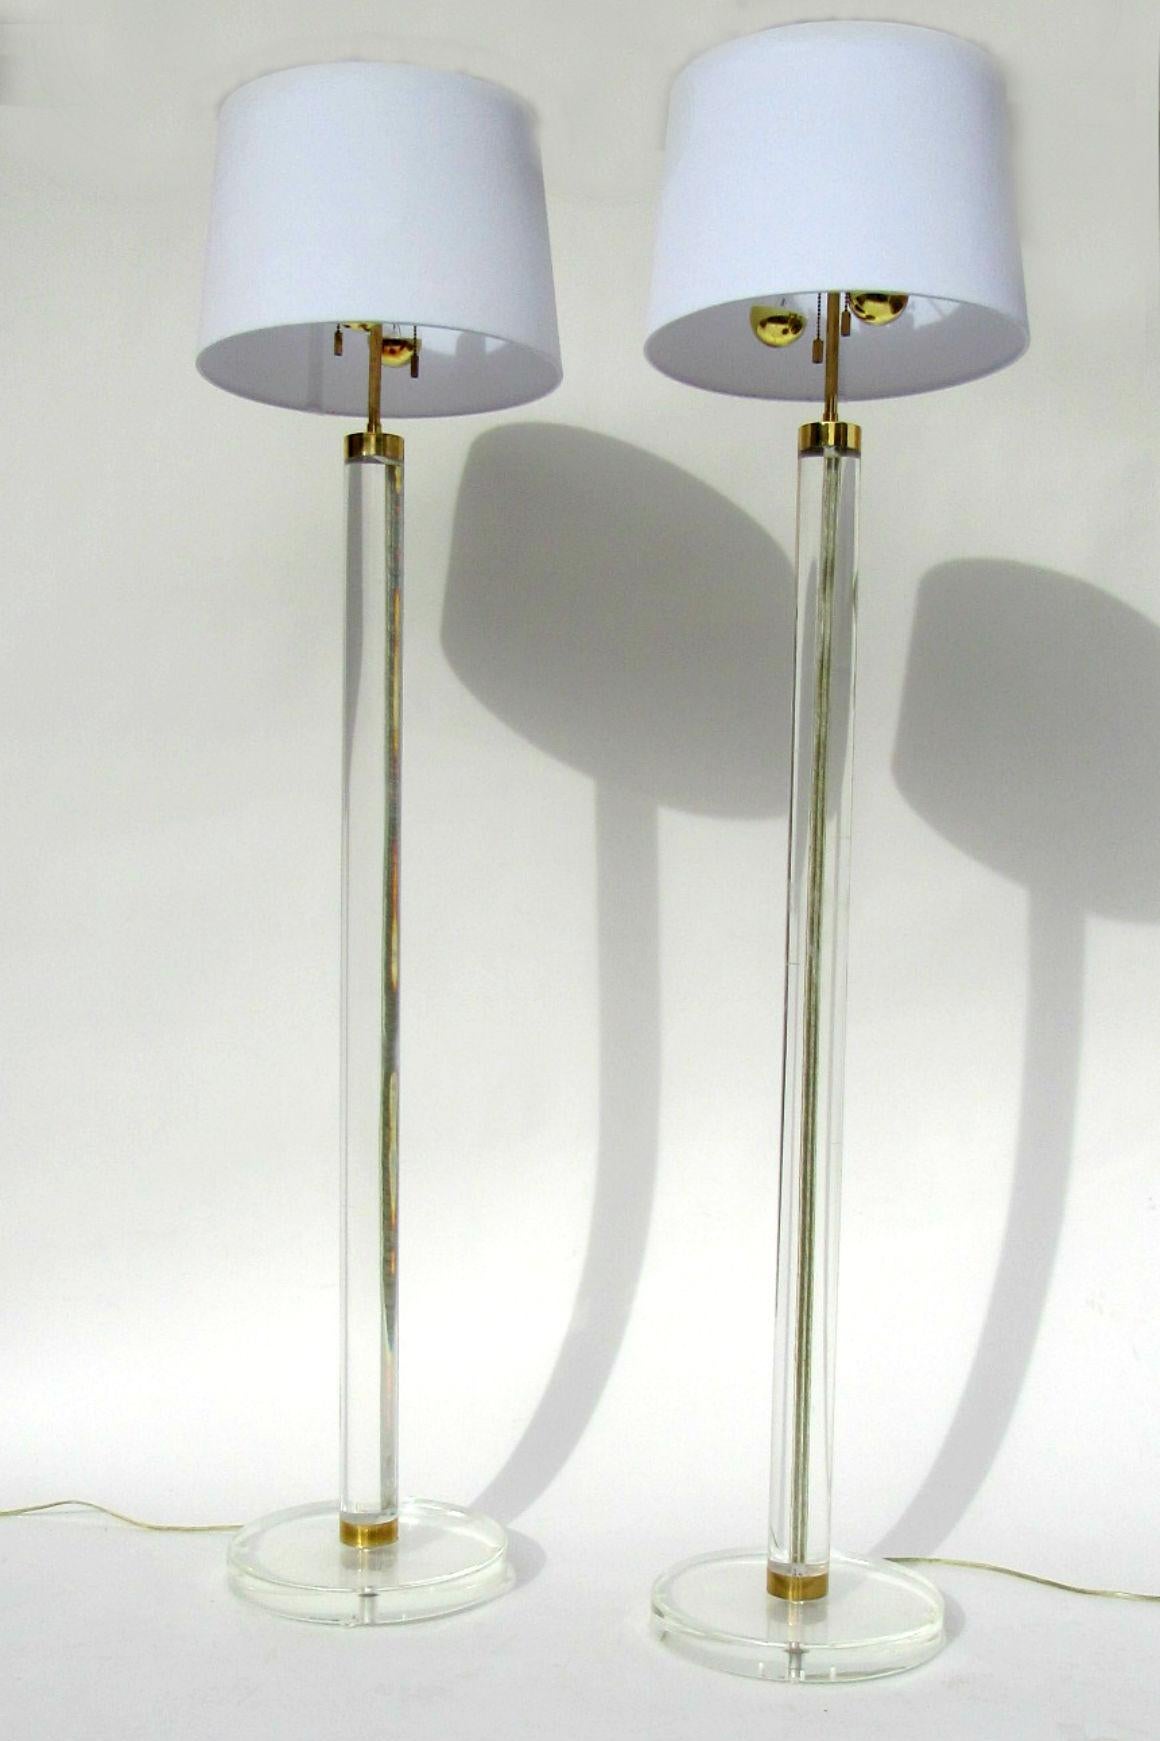 Karl Springer Lucite and Brass Floor Lamps, USA, 1970s.  Exquisitely crafted pair of brass and Lucite column floor lamps by Karl Springer, American, 1970s.  Heavy Lucite columns with brass hardware and incised channel for cord.  